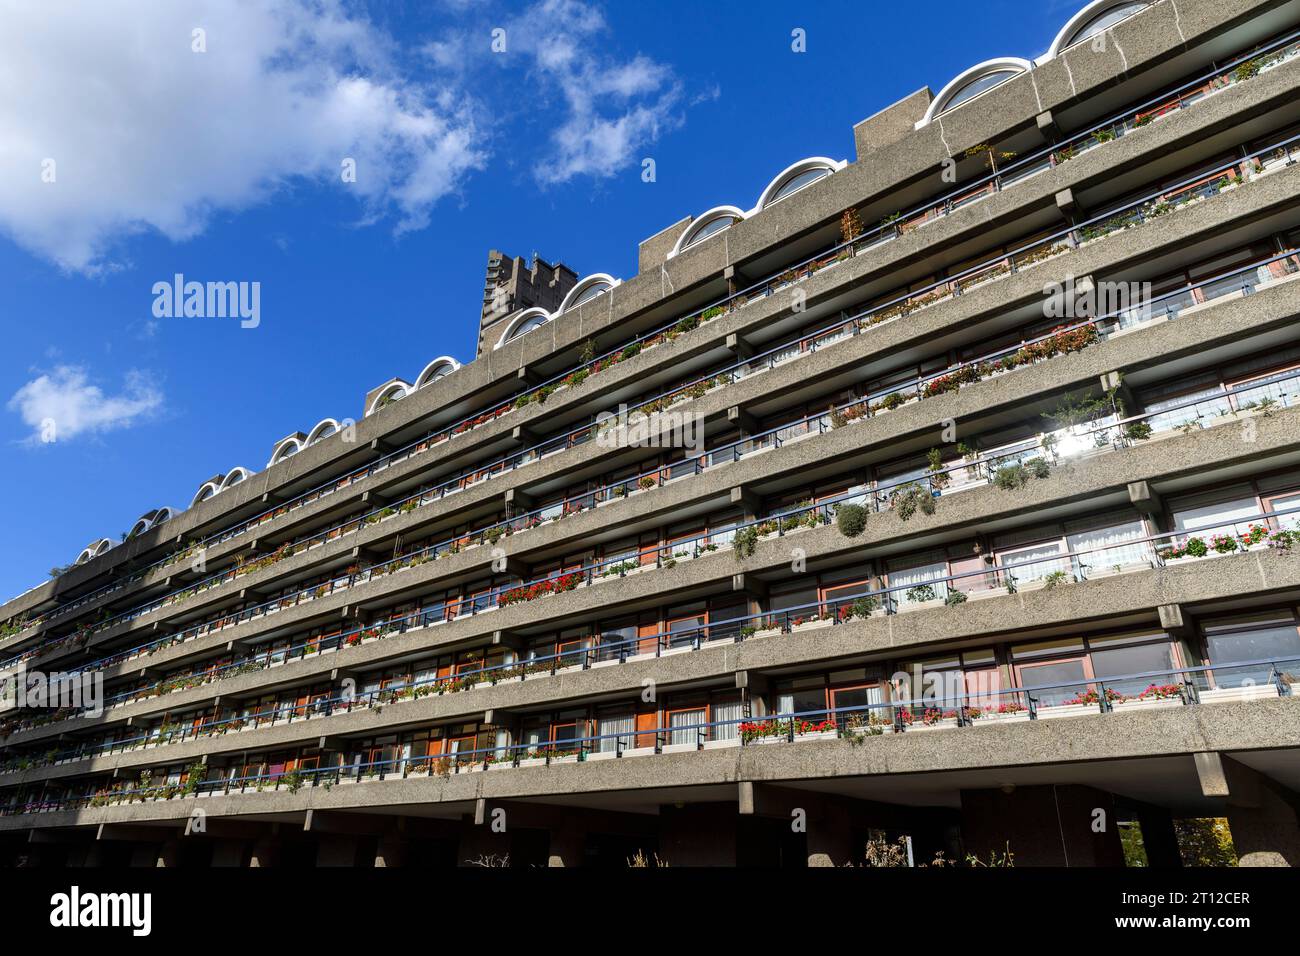 Thomas More House is an apartment block in the Barbican Estate, designed by Chamberlin, Powell, and Bon, and is a prominent example of British brutali Stock Photo